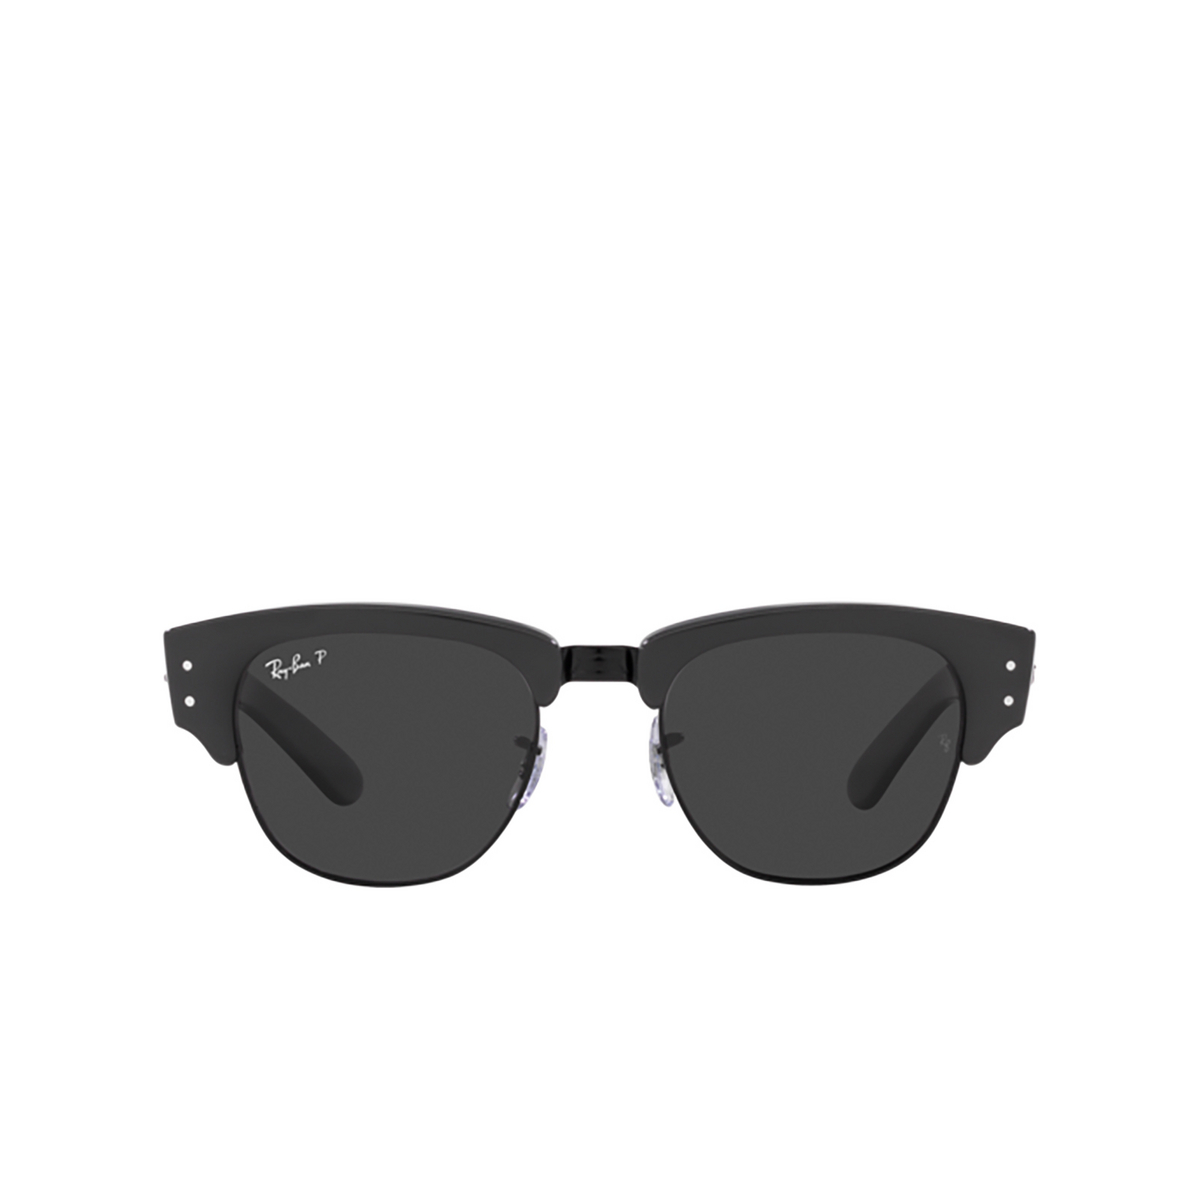 Ray-Ban MEGA CLUBMASTER Sunglasses 136748 Grey On Black - front view